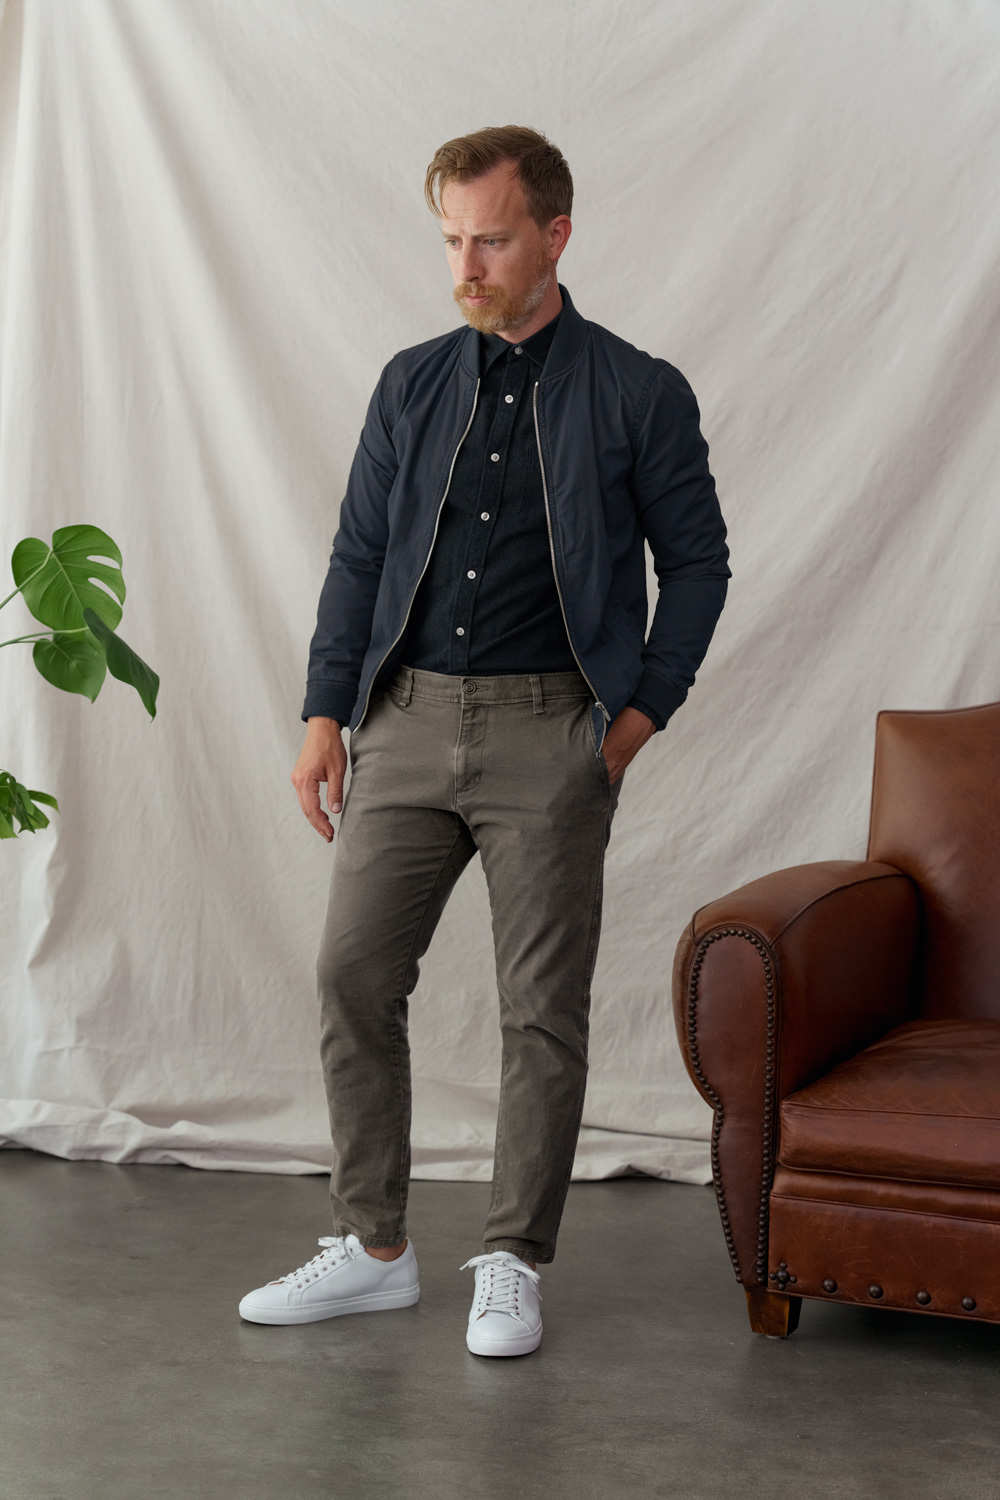 men's smart casual outfit with bomber jacket, black button up shirt, tan chino pants, andand white sneakers